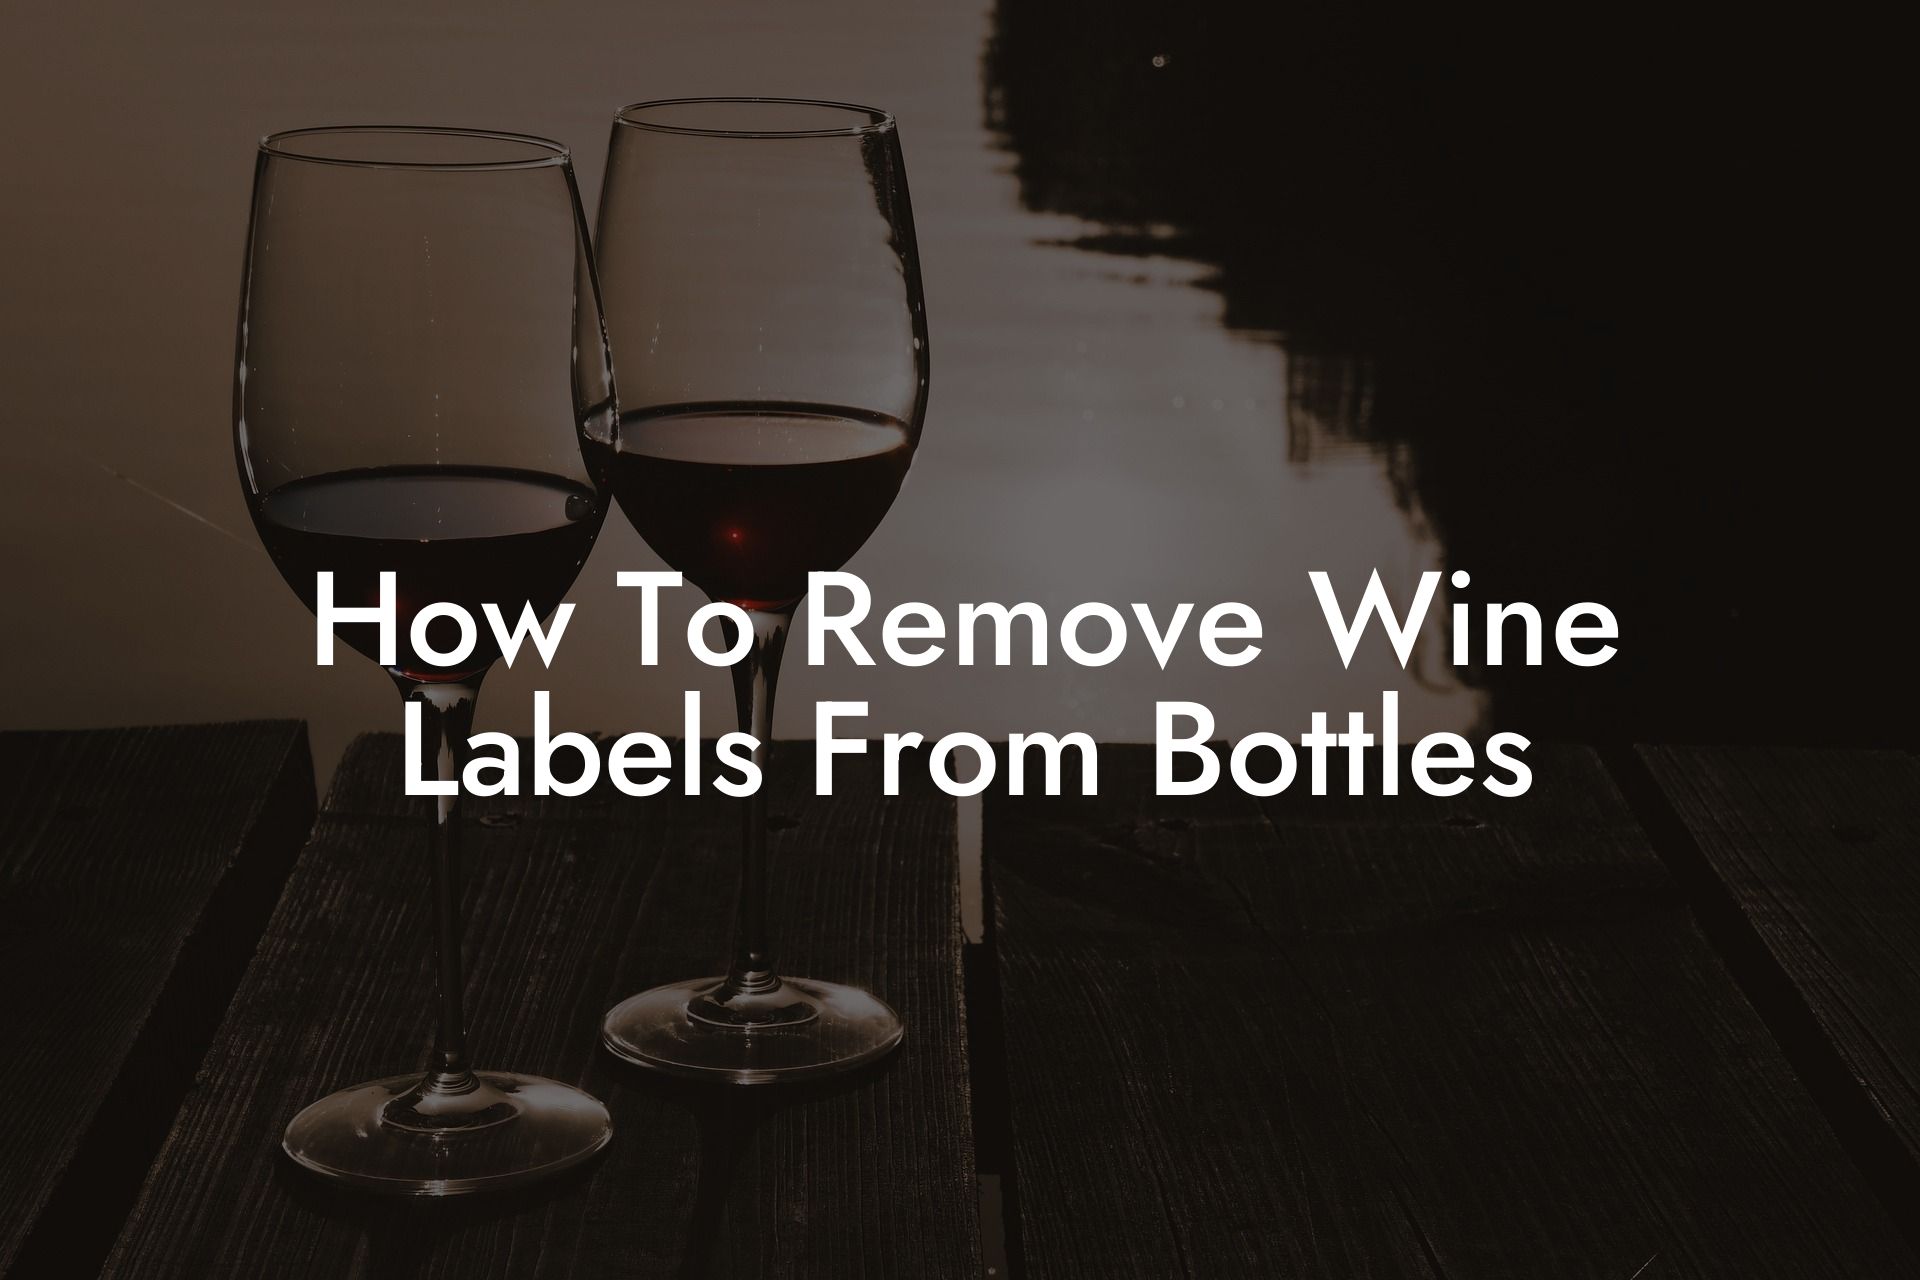 How To Remove Wine Labels From Bottles